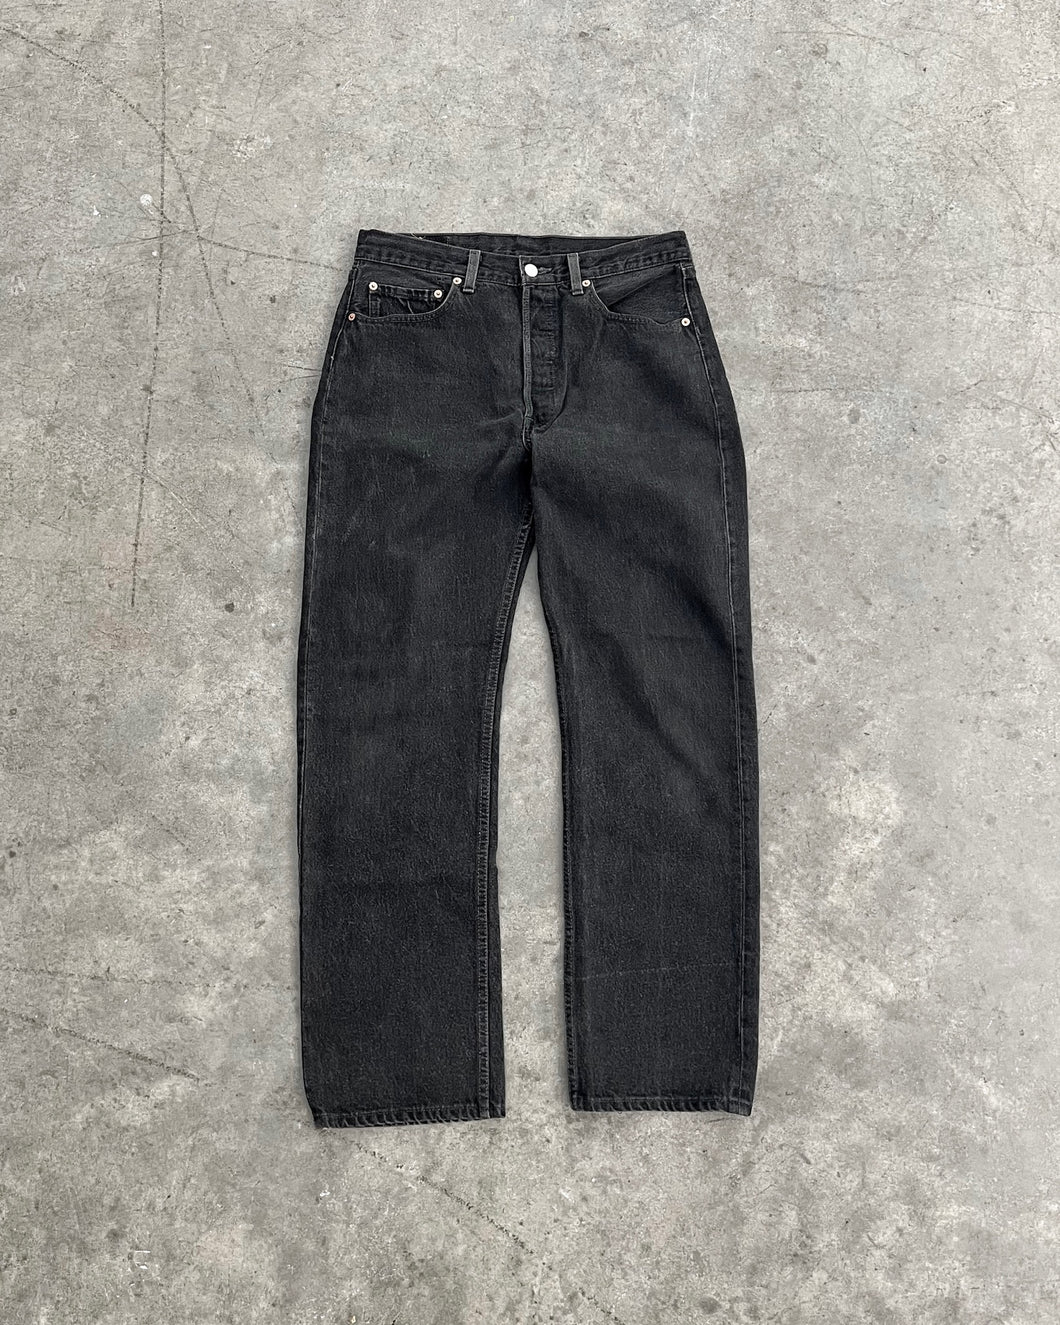 LEVI’S 501 FADED BLACK JEANS - 1990S